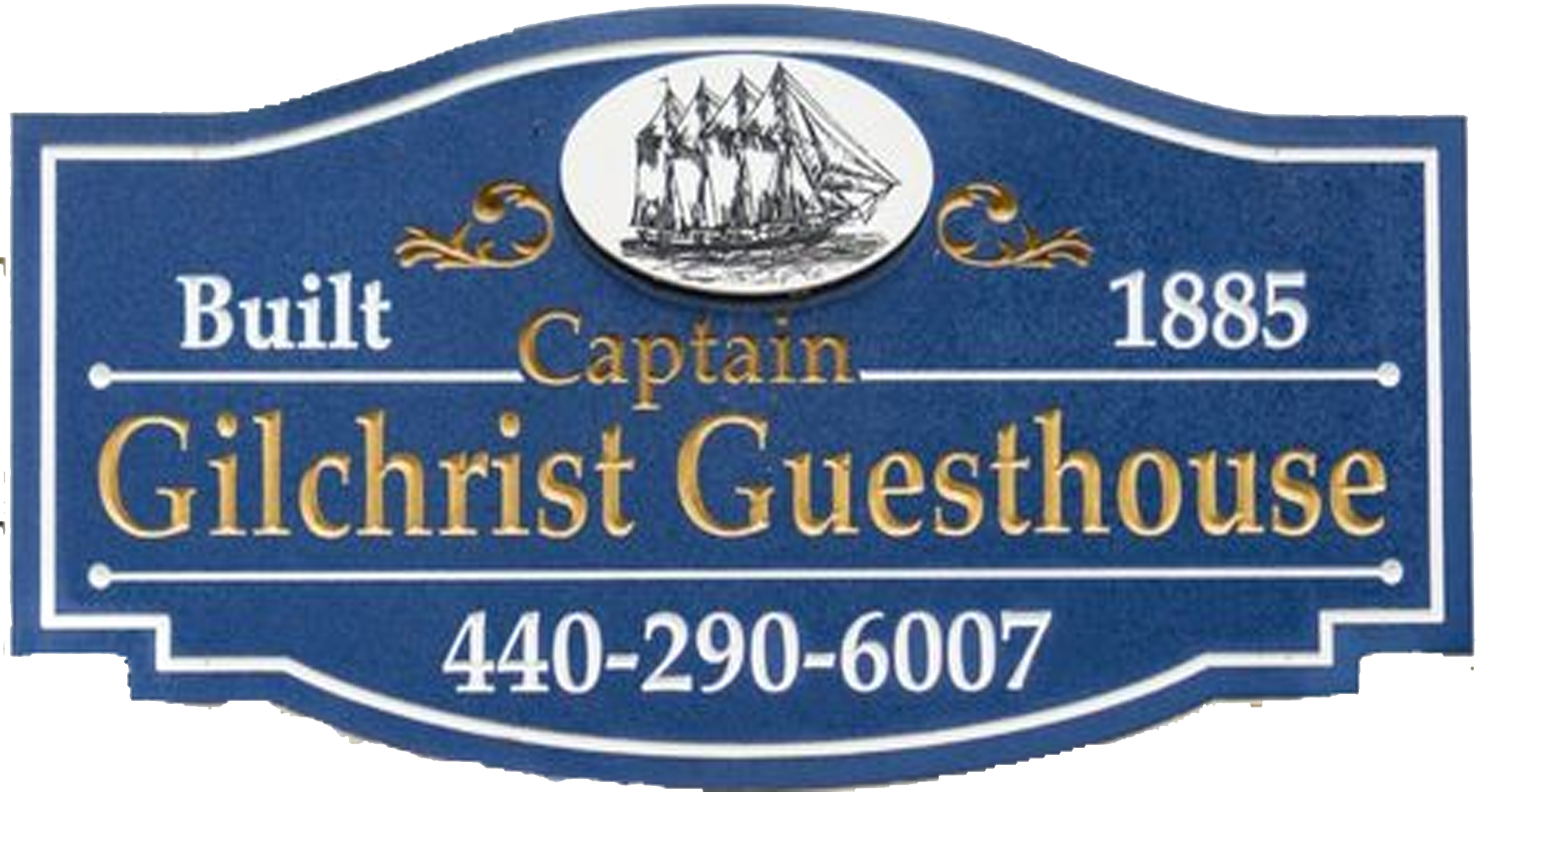 Captain Gilchrist Guesthouse